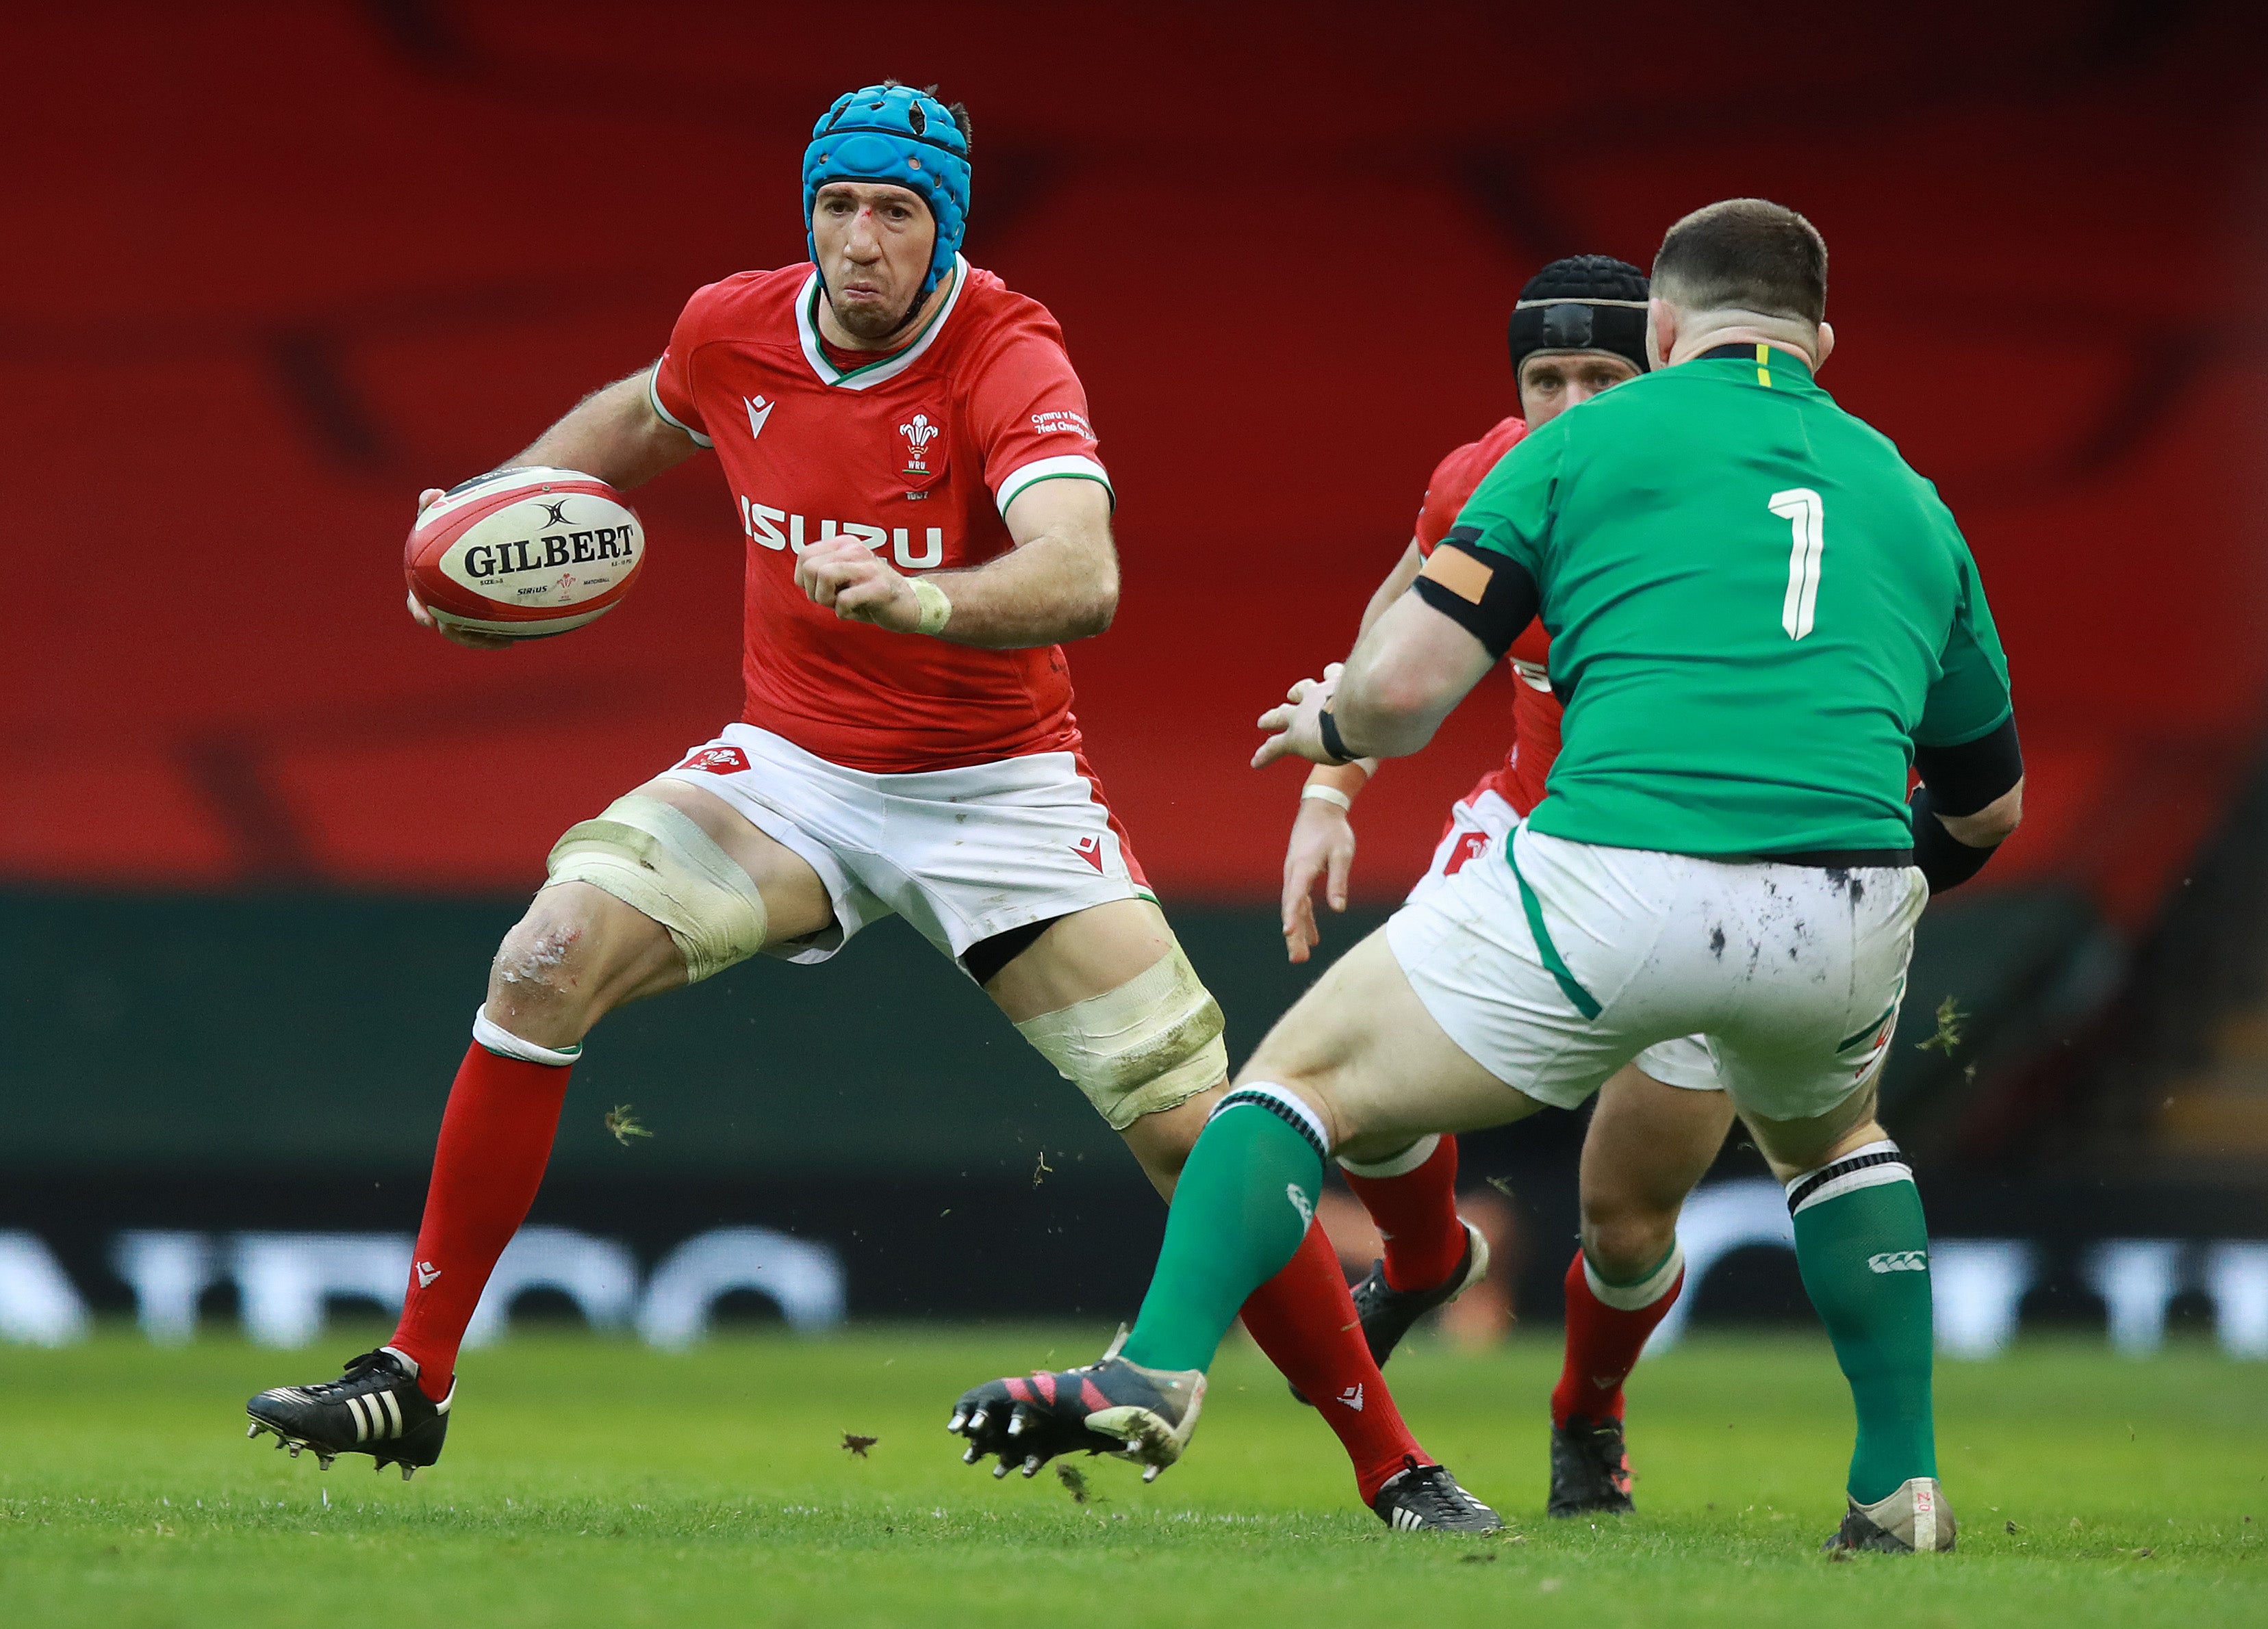 The 33-year-old takes over from the injured Dan Biggar